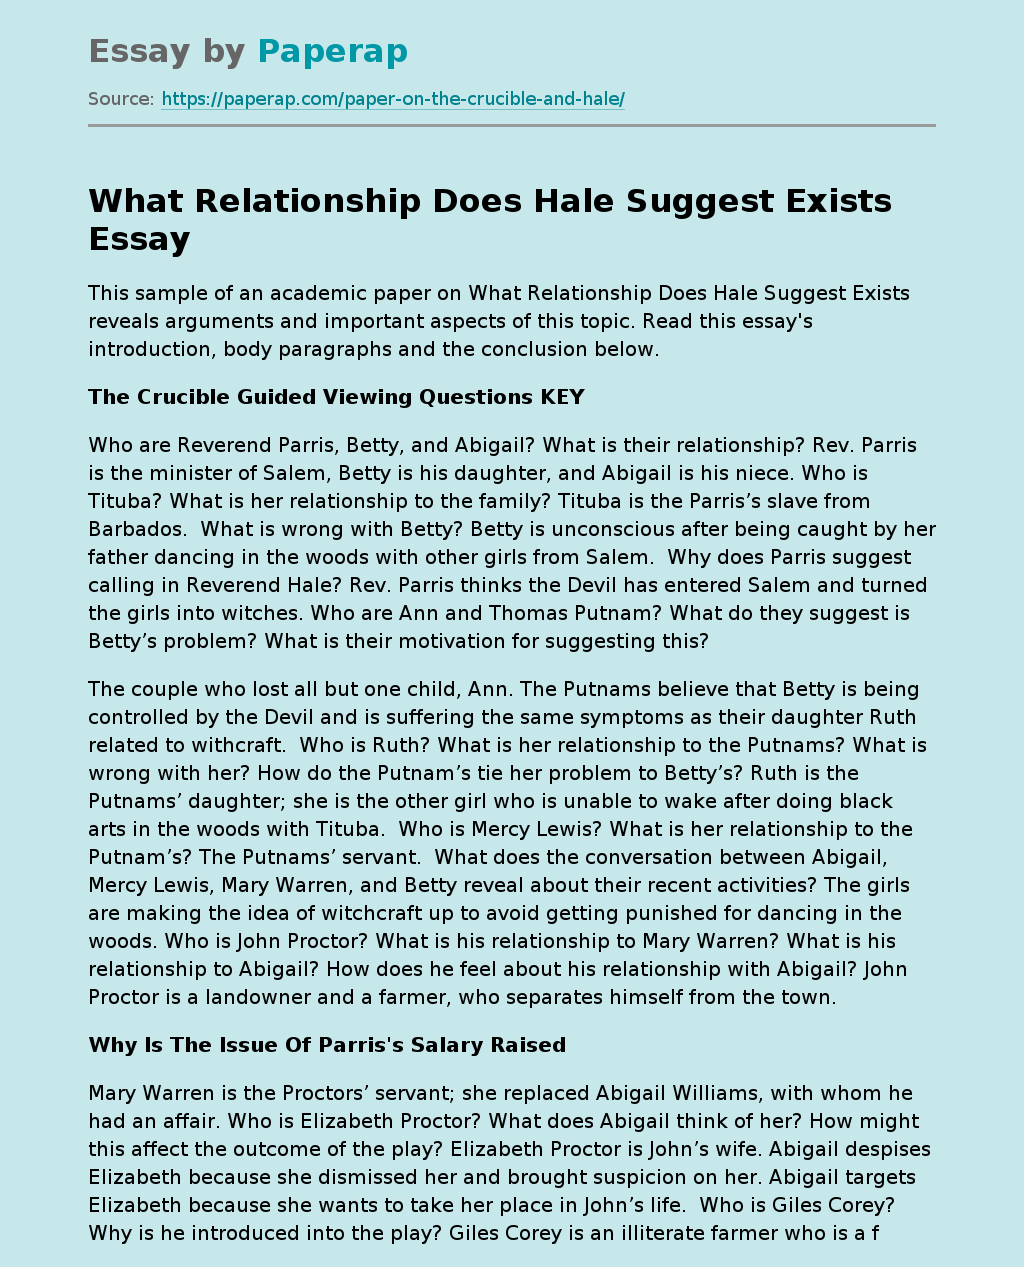 What Relationship Does Hale Suggest Exists